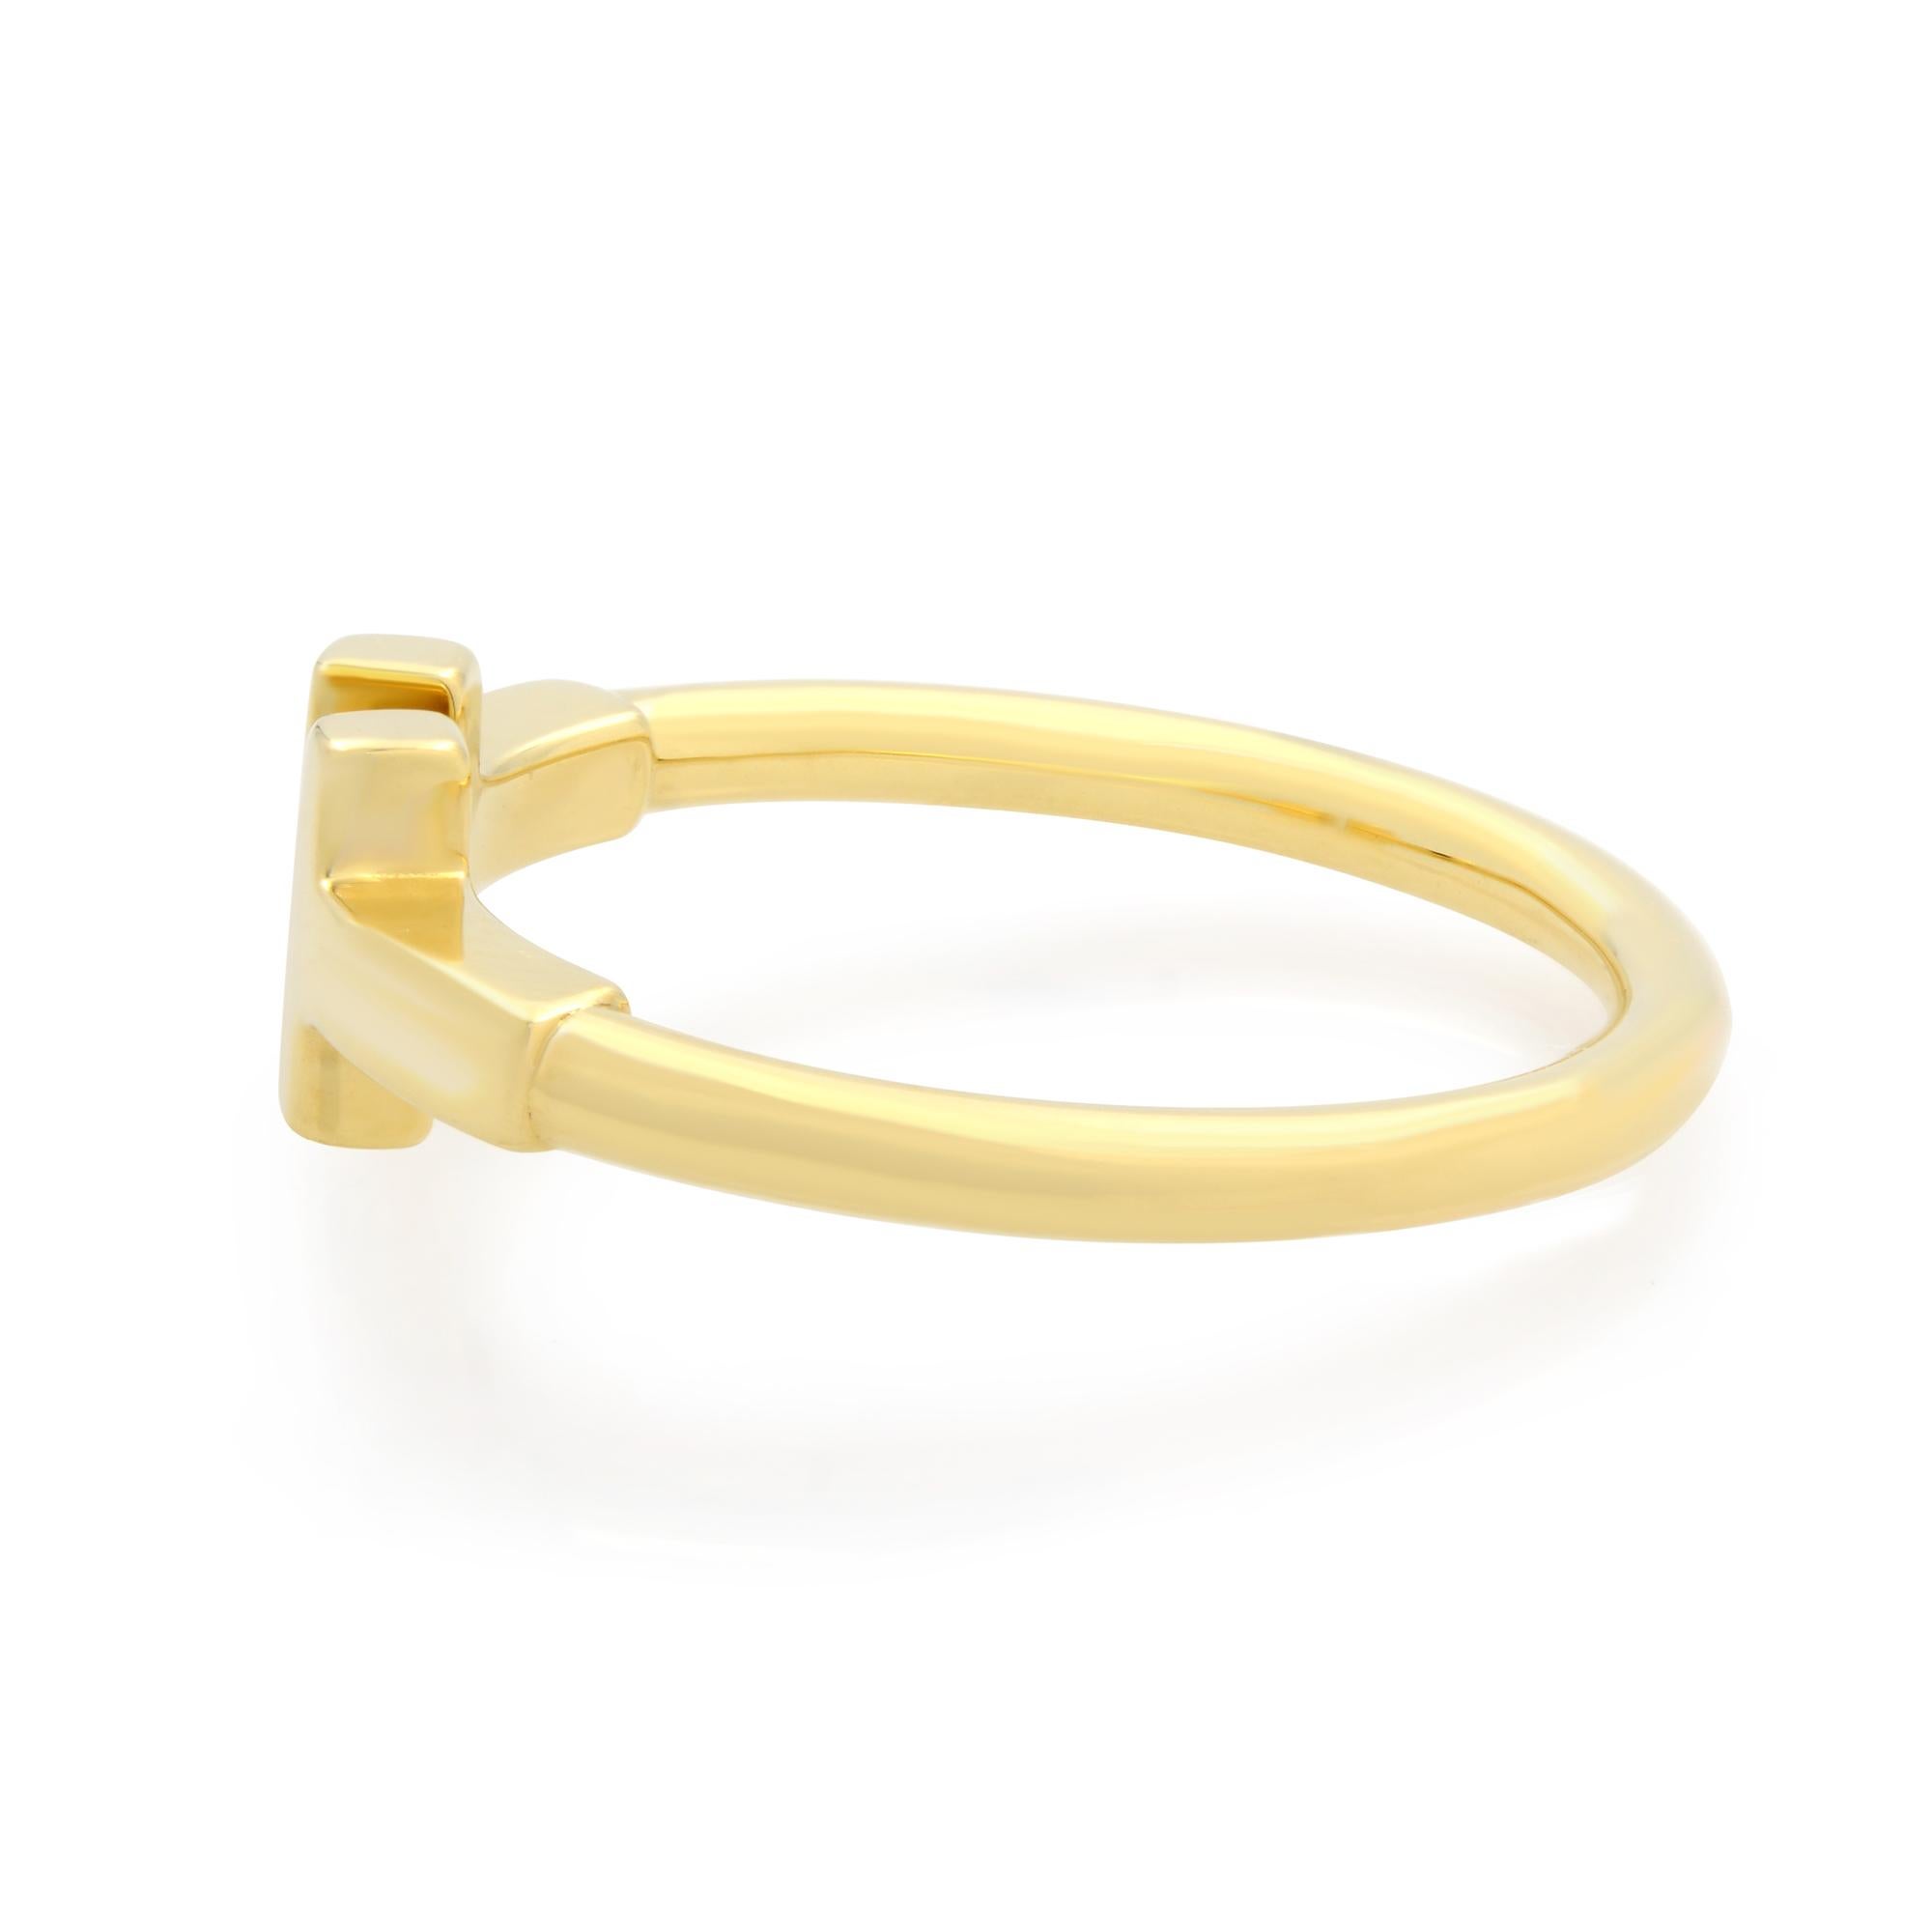 Tiffany & Co 18k yellow gold Tiffany T wire ring. Size 5. As multifaceted as it is iconic, the Tiffany T collection is a tangible reminder of the connections we feel but can't always see. Style this ring with other Tiffany rings for a striking